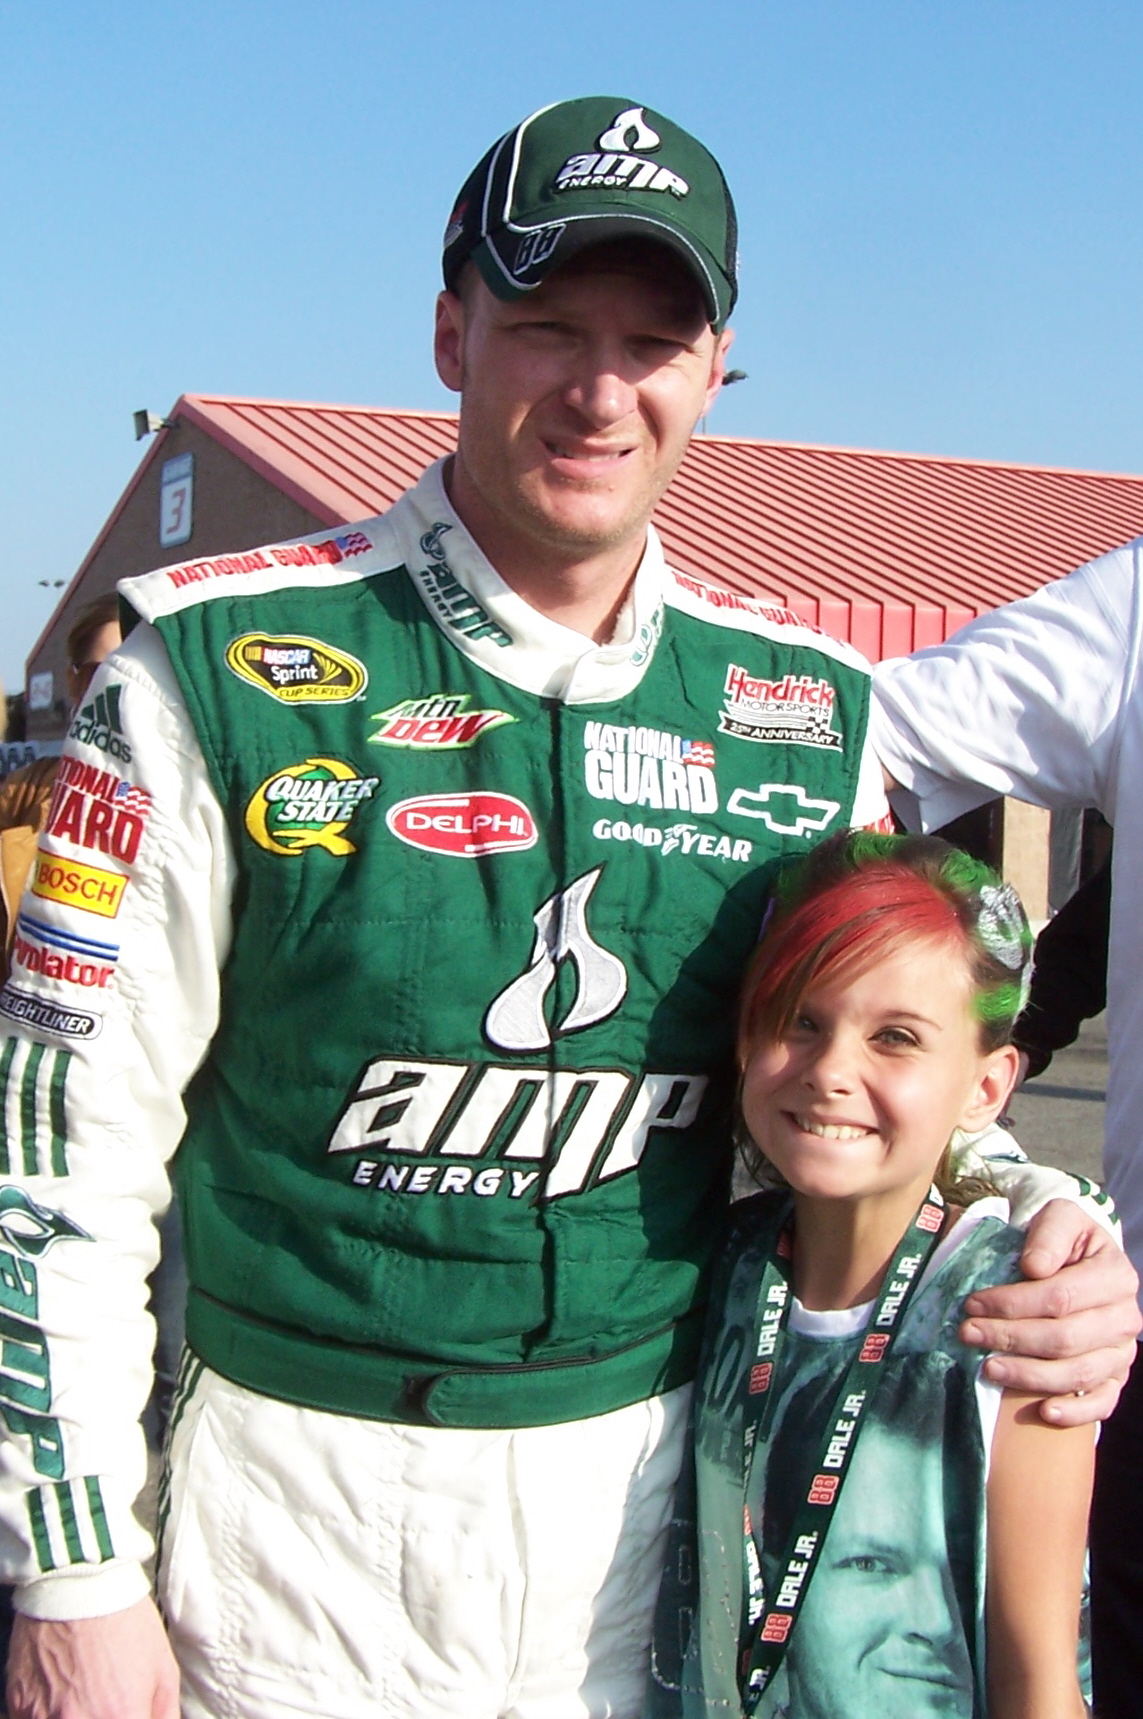 Sierra Willis and Dale Earnhardt Junior at the California Speedway